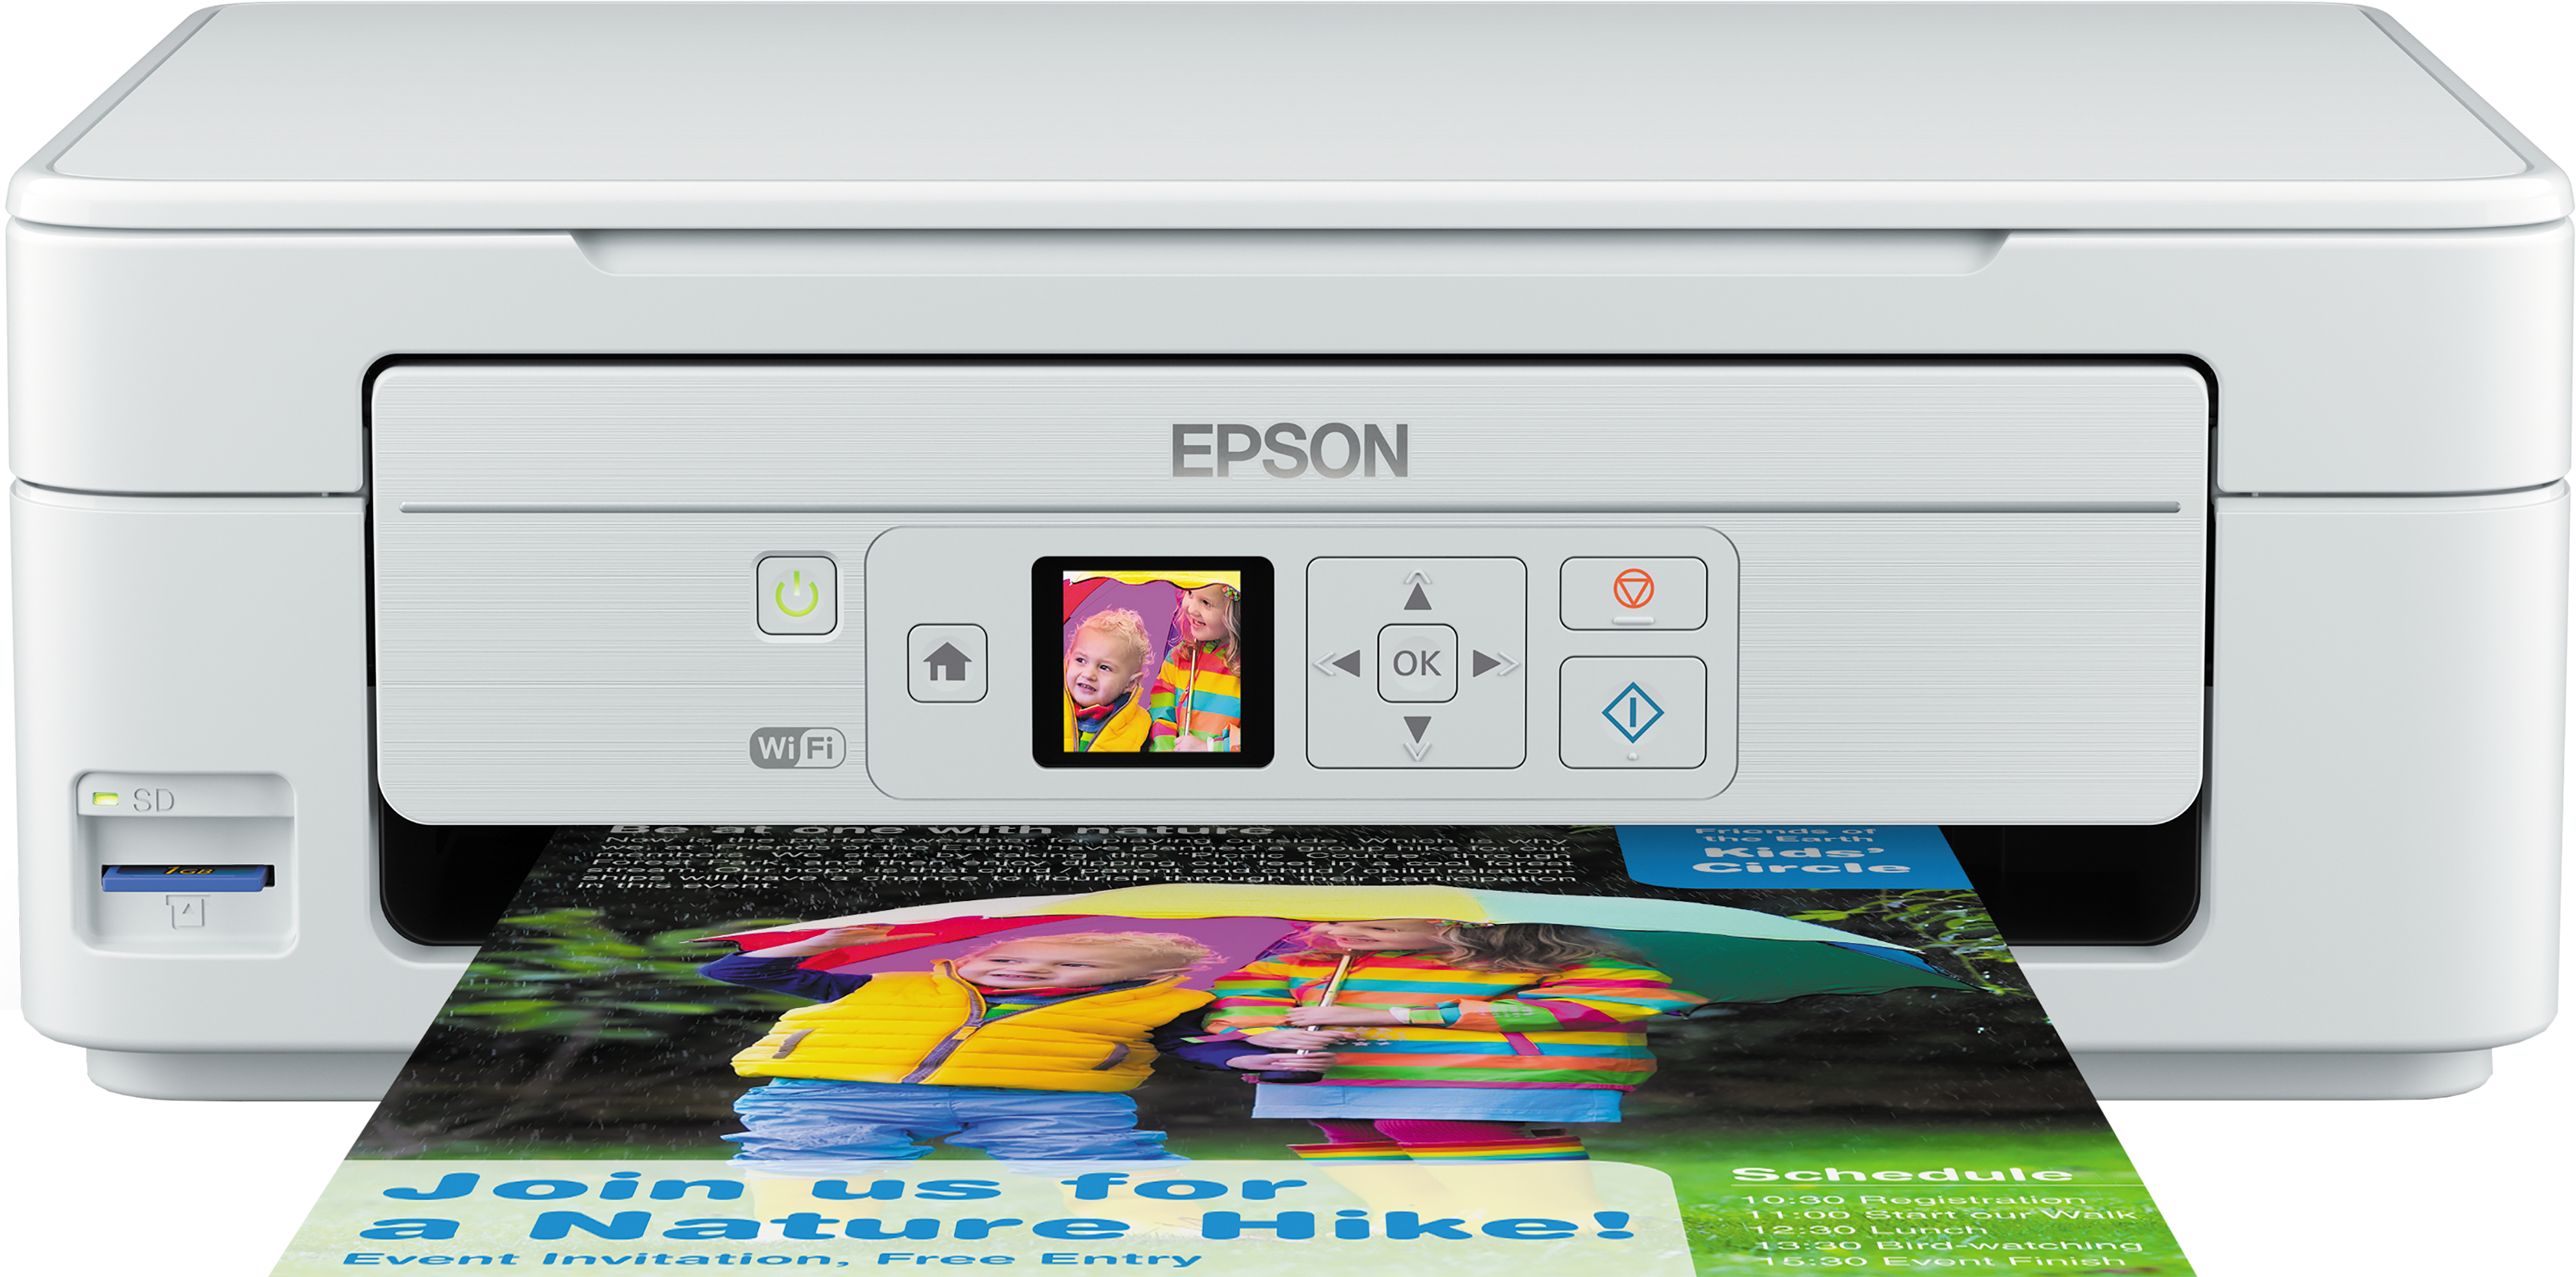 Stewart ø Foresee mandat Expression Home XP-345 | Consumer | Inkjet Printers | Printers | Products |  Epson United Kingdom